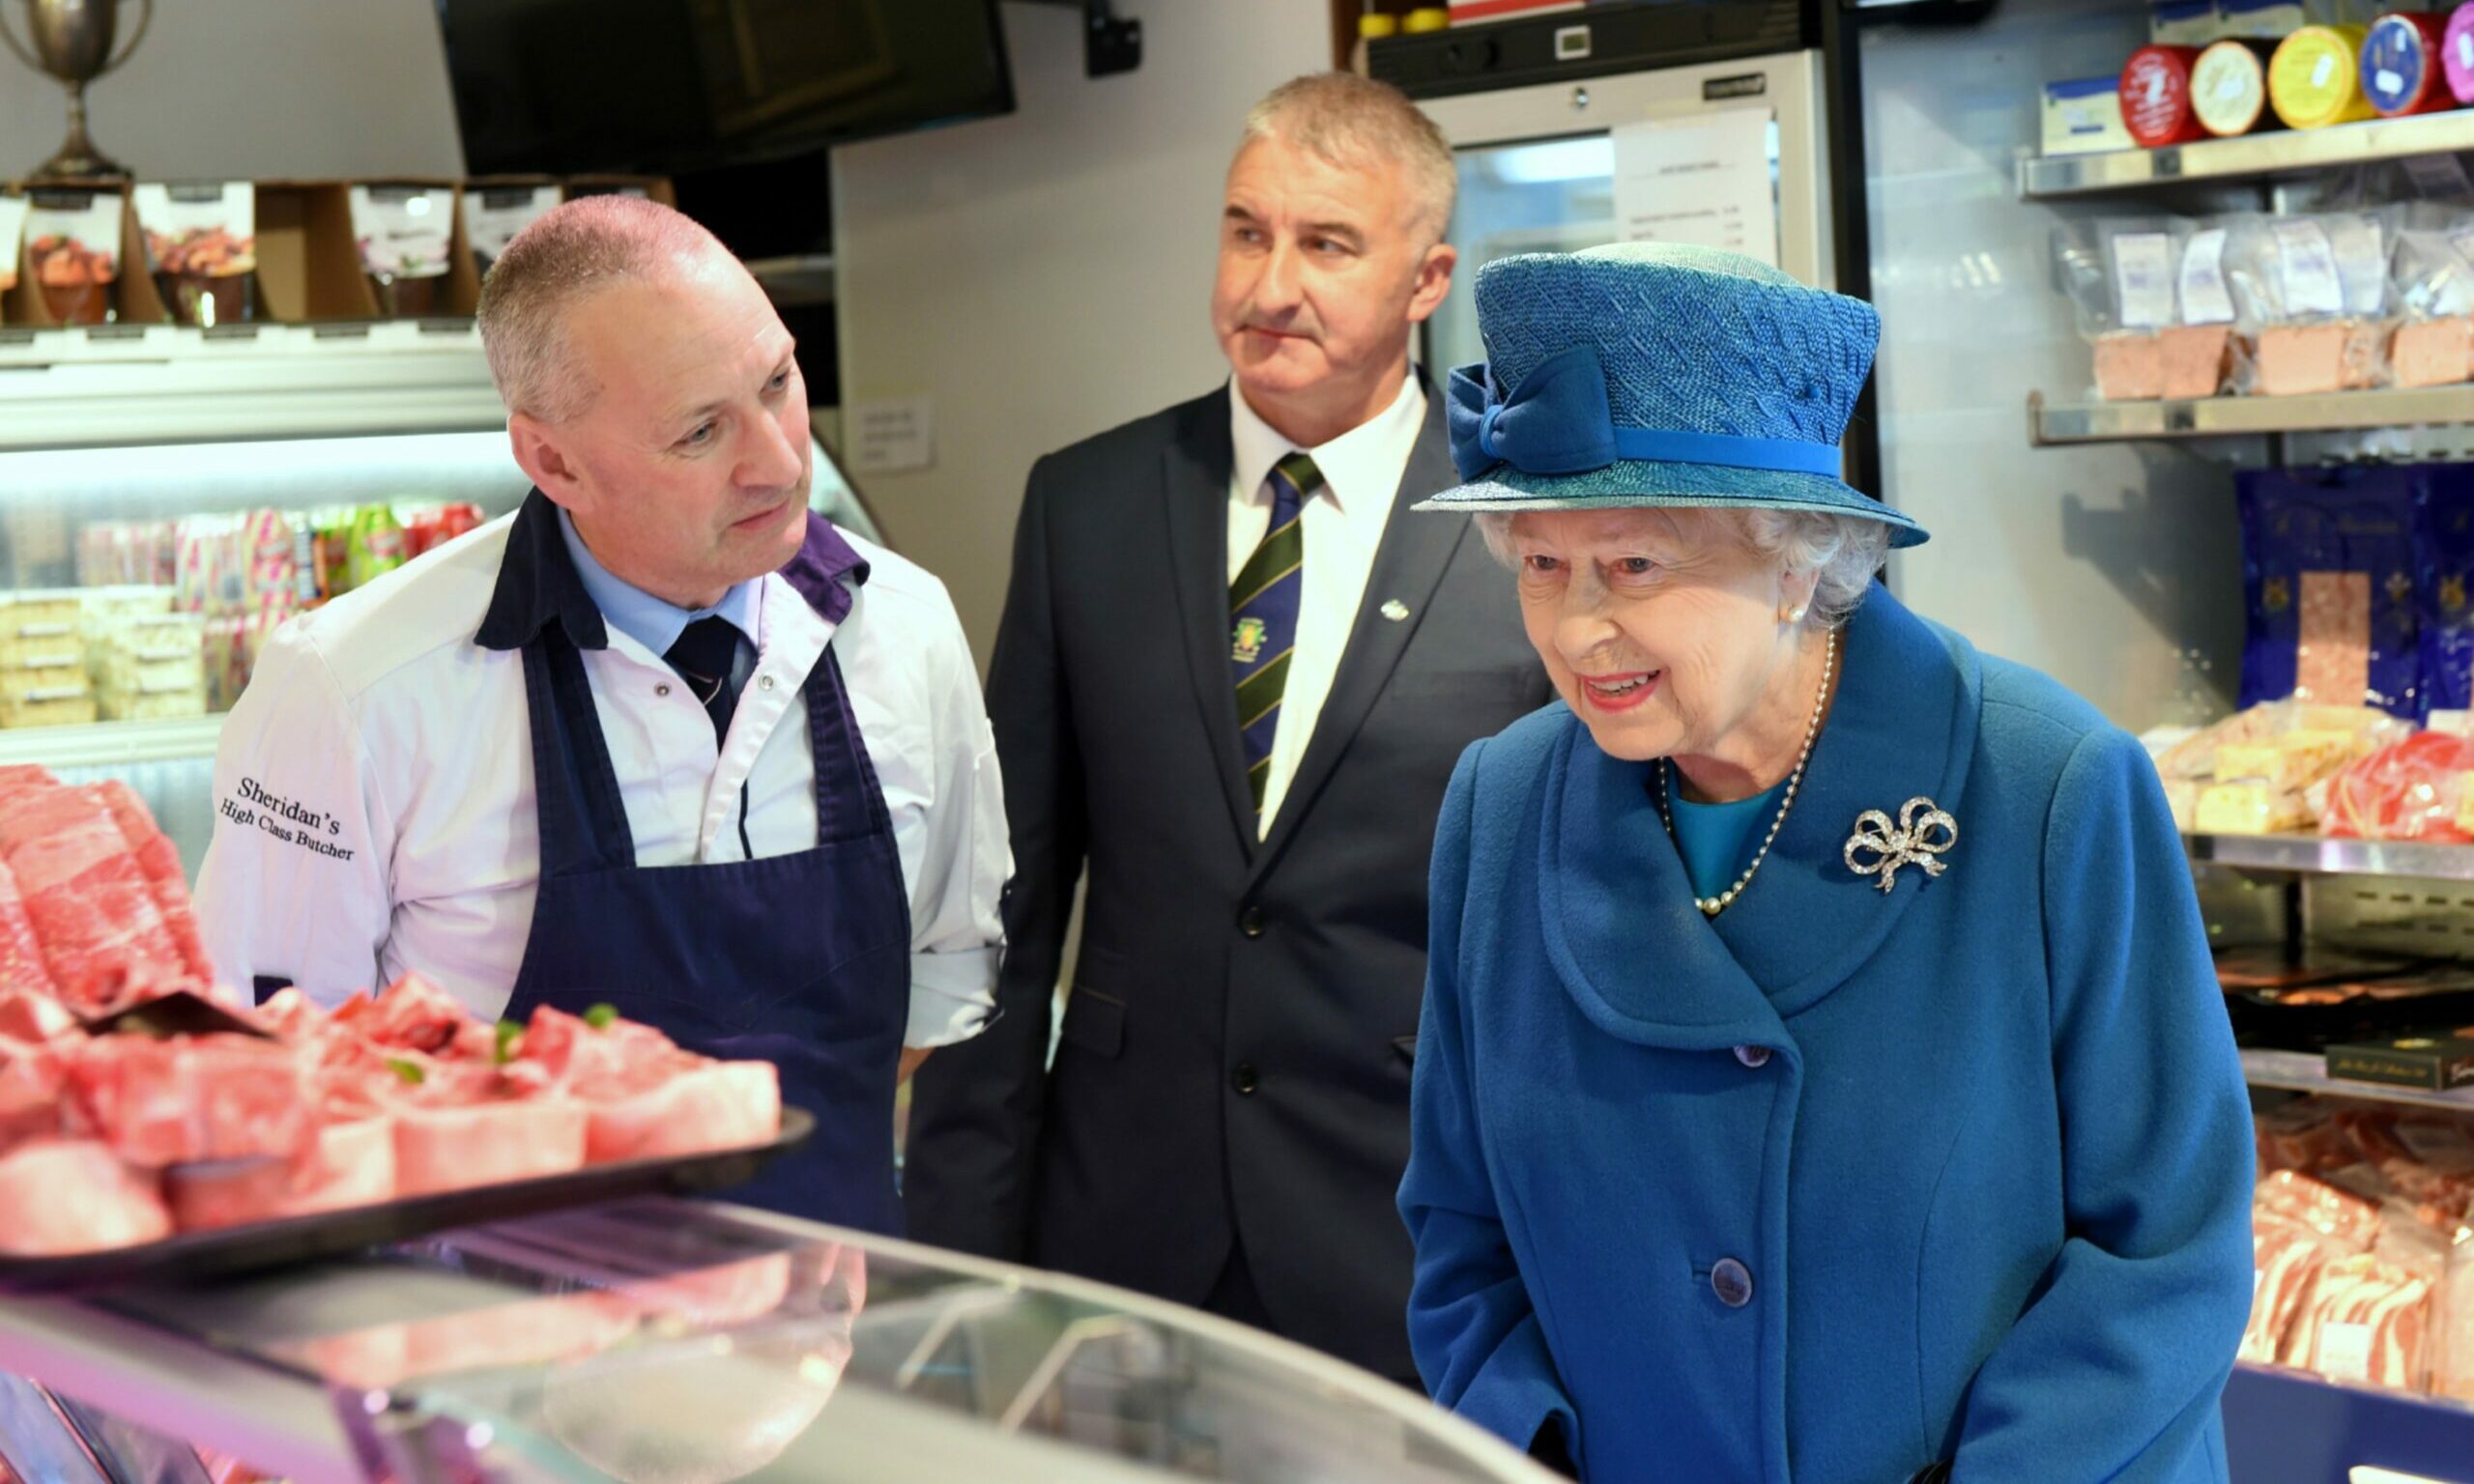 Her Majesty The Queen visited H.M. Sheridan Butchers in Ballater to hear how they were affected by Storm Frank flooding in early 2016. Her route from Balmoral Castle will pass the village on its way to Aberdeen on Sunday. Picture by DCT Media.